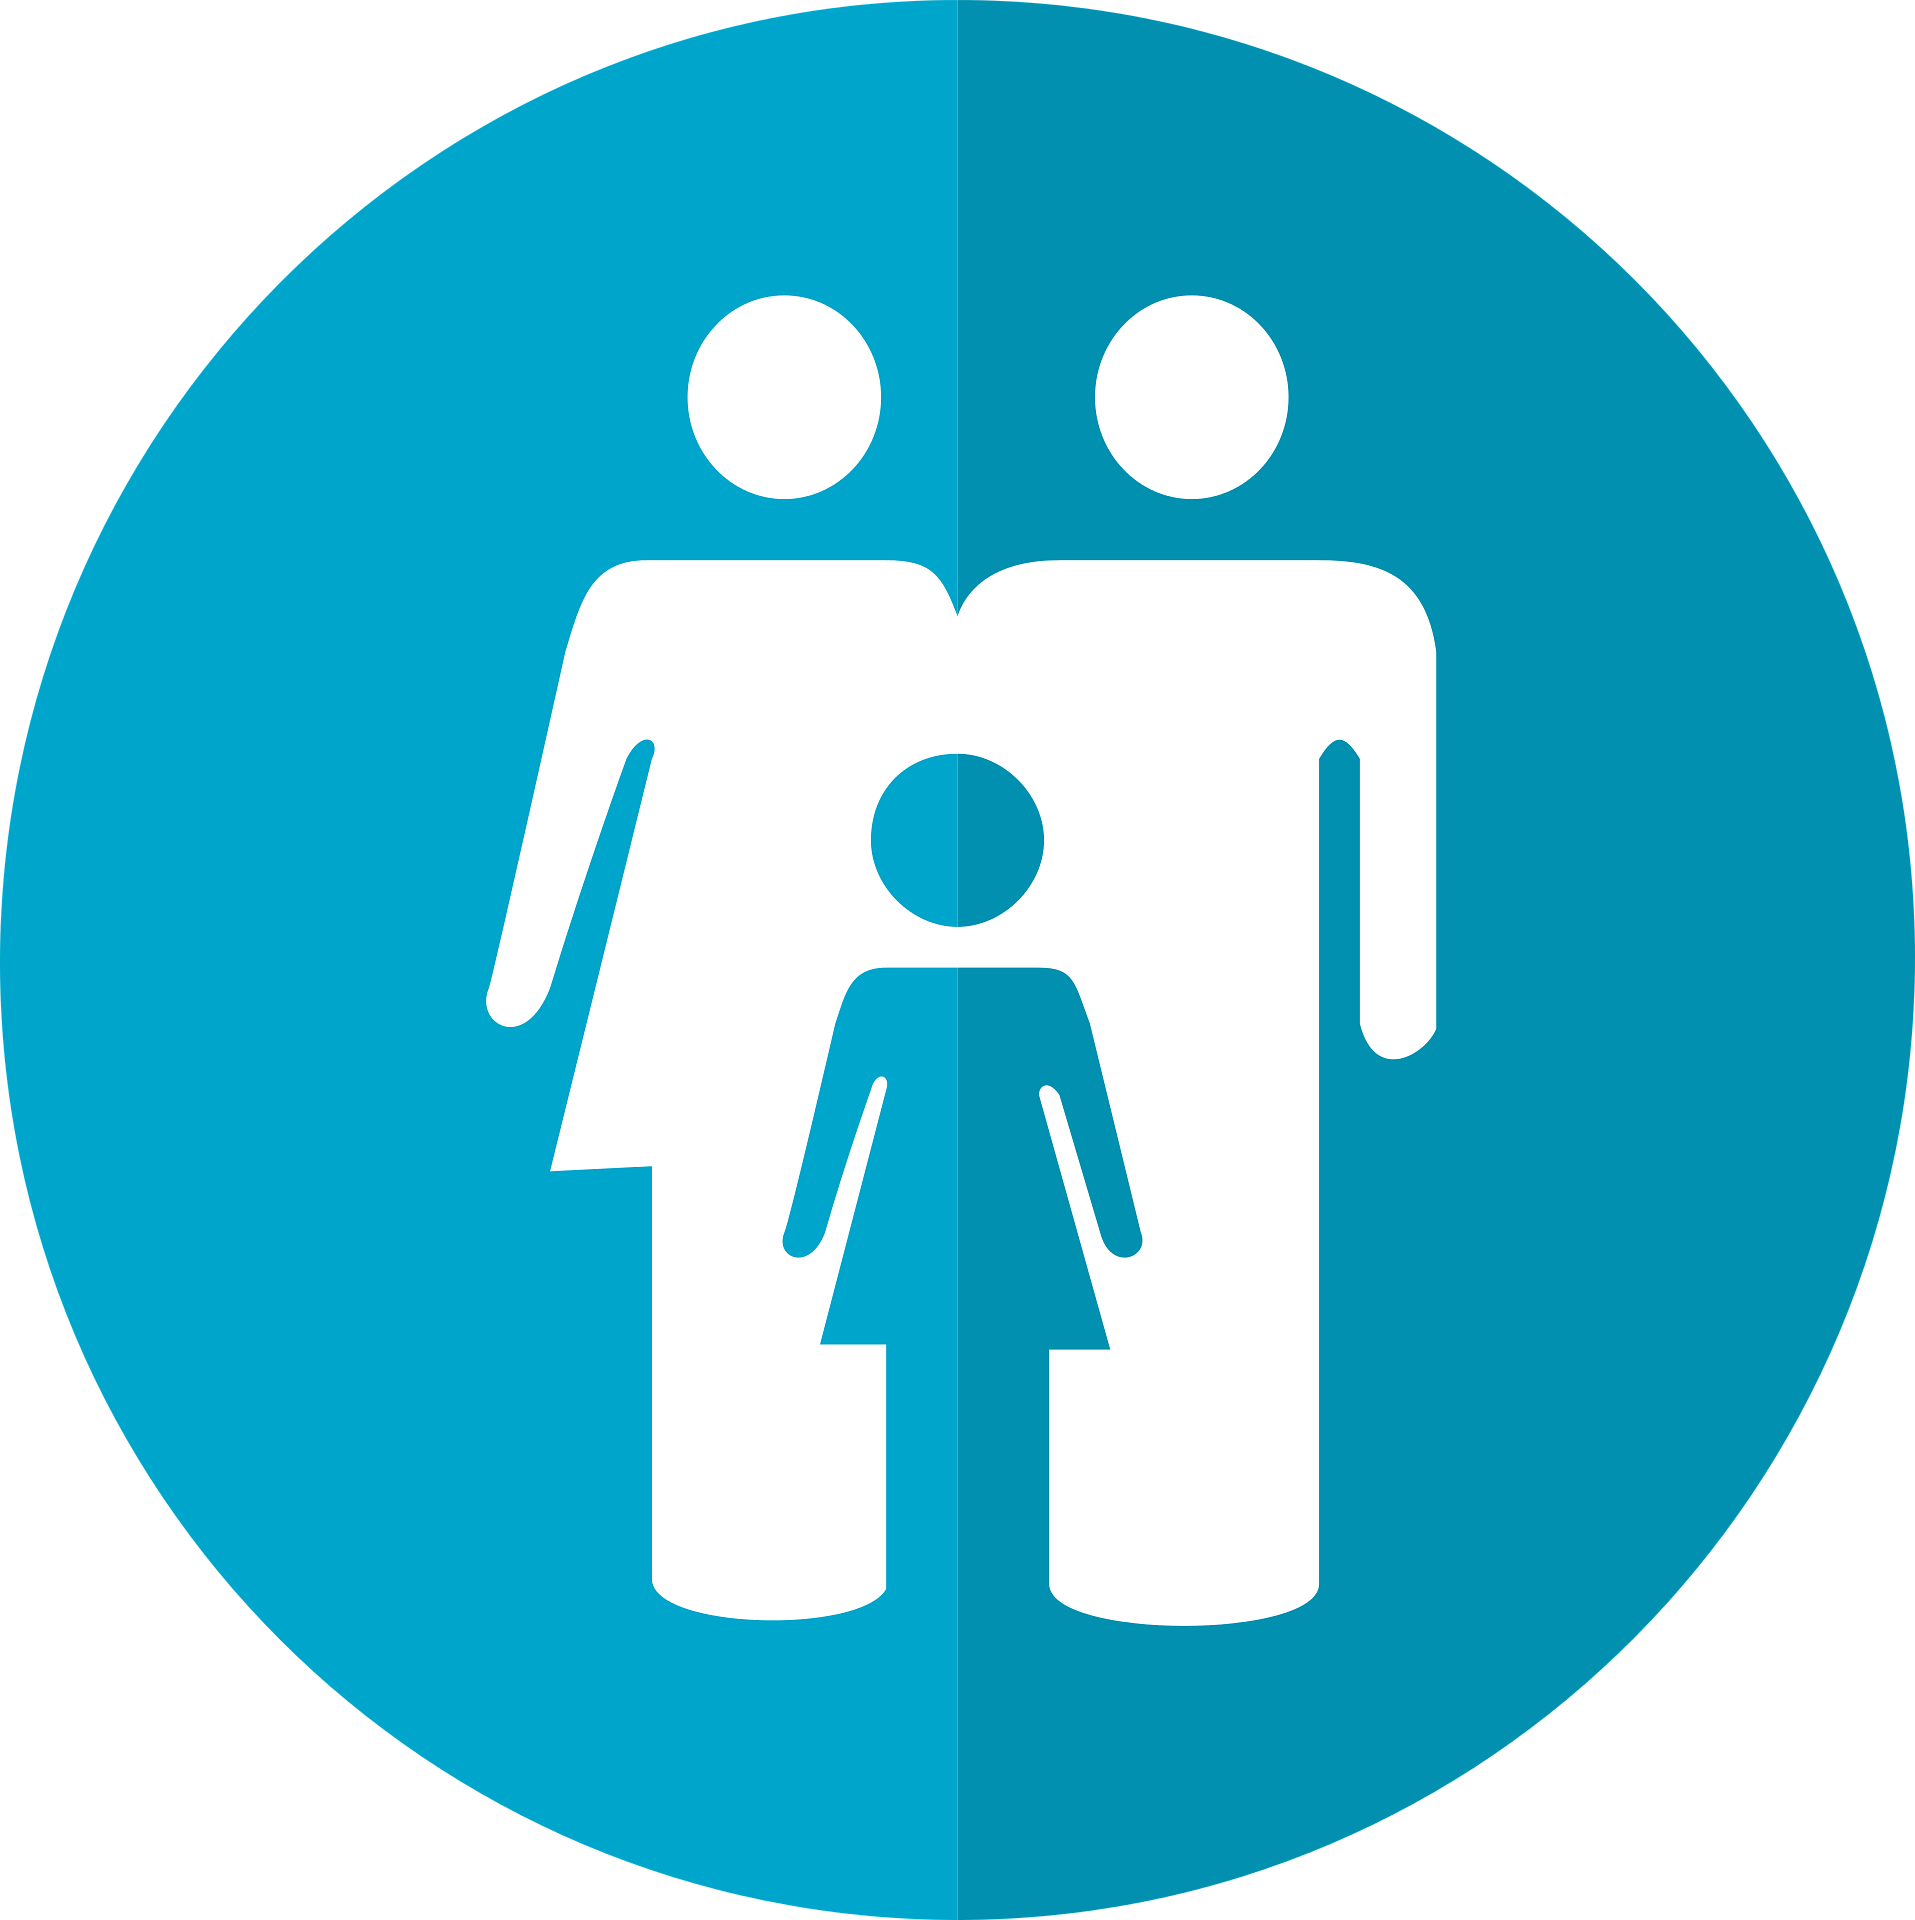 Icon showing man, woman and child